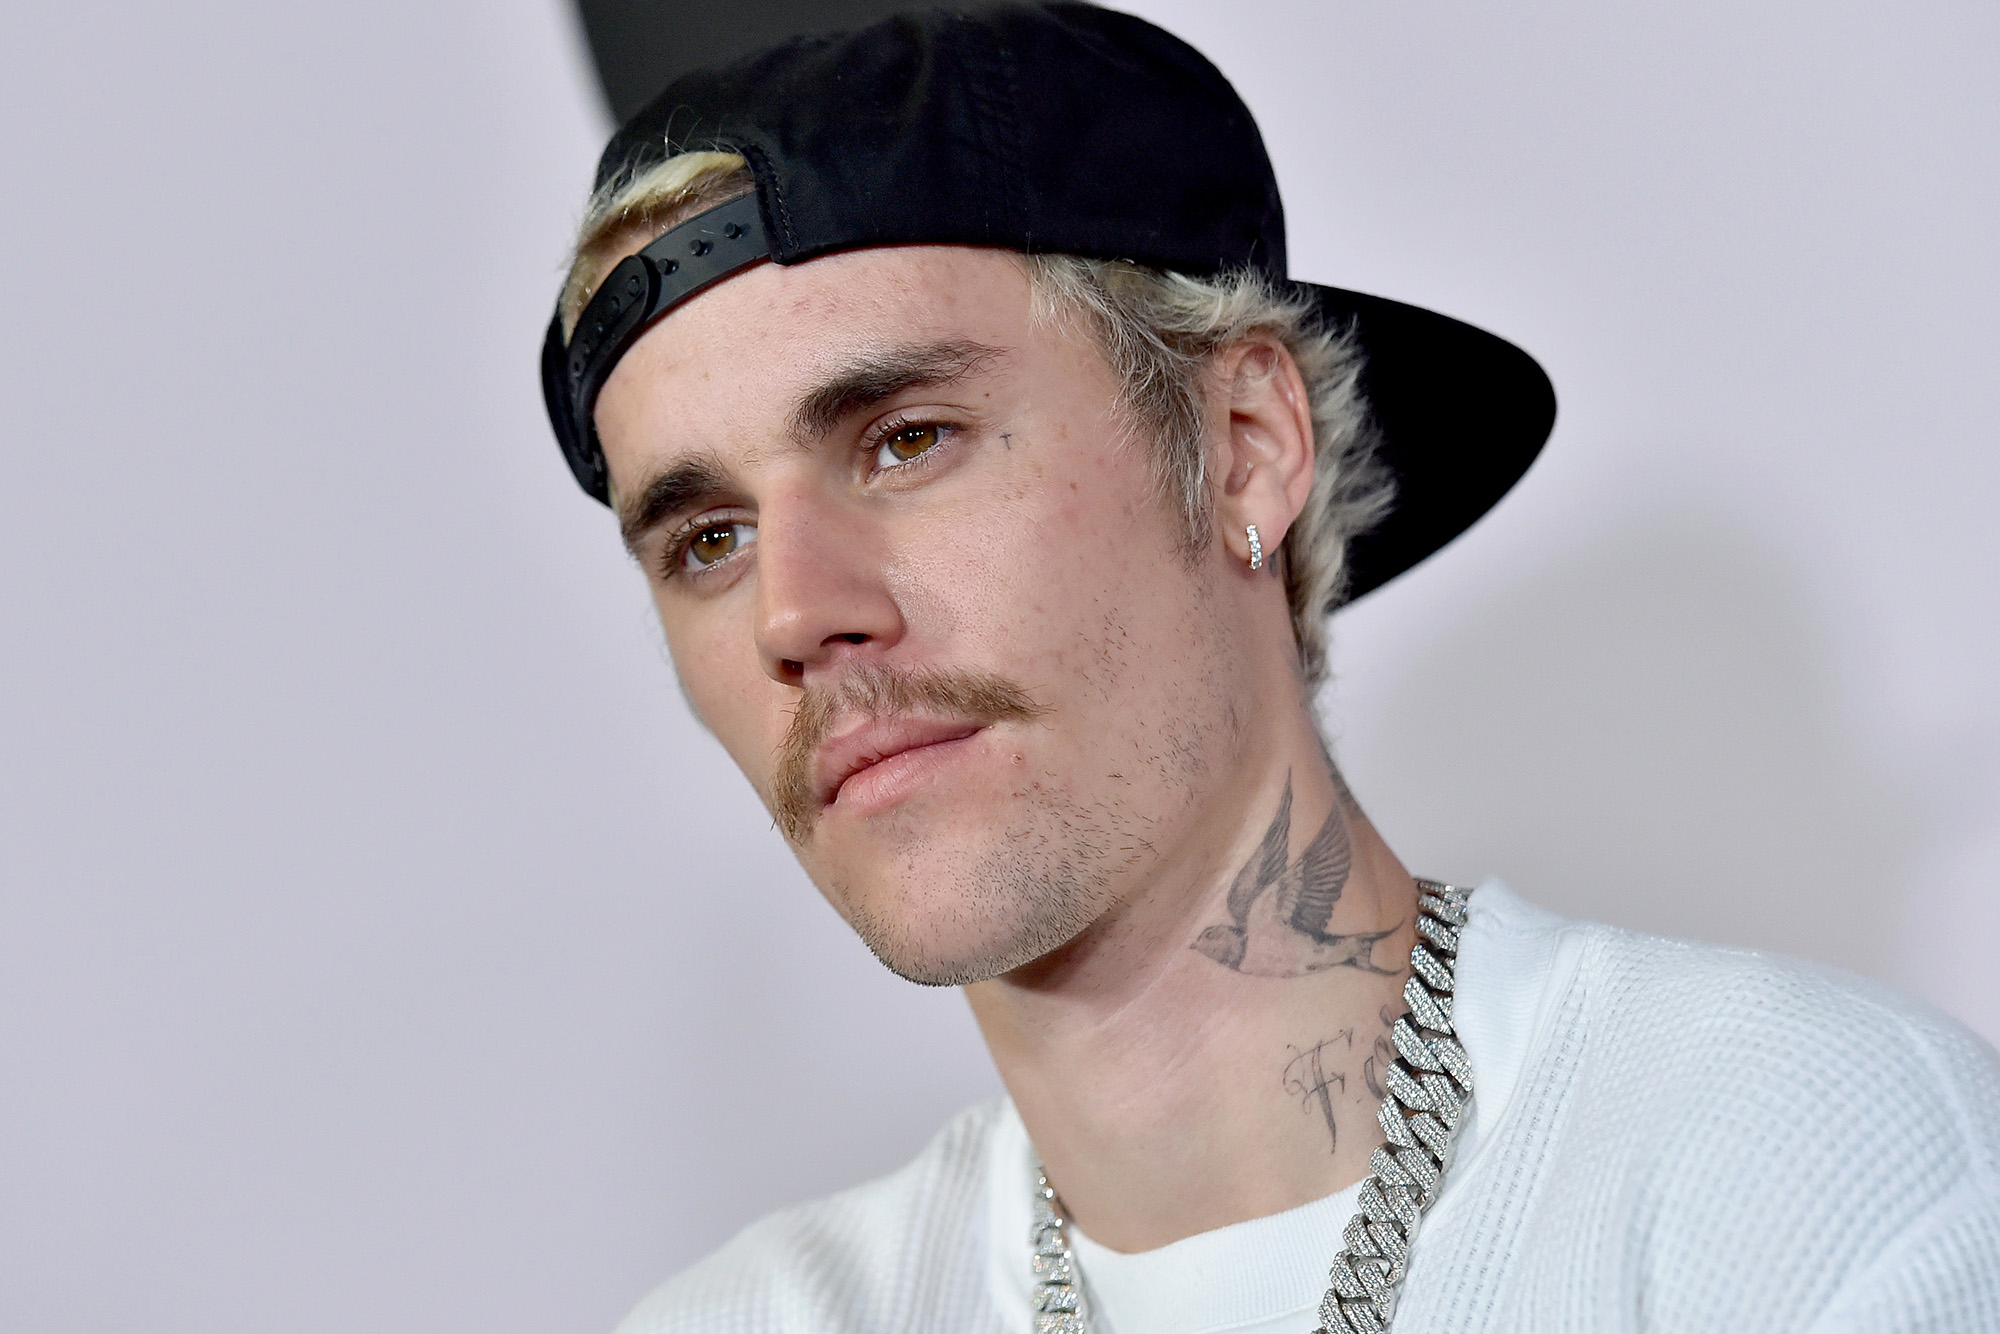 Justin Bieber's ugly mustache isn't going away anytime soon